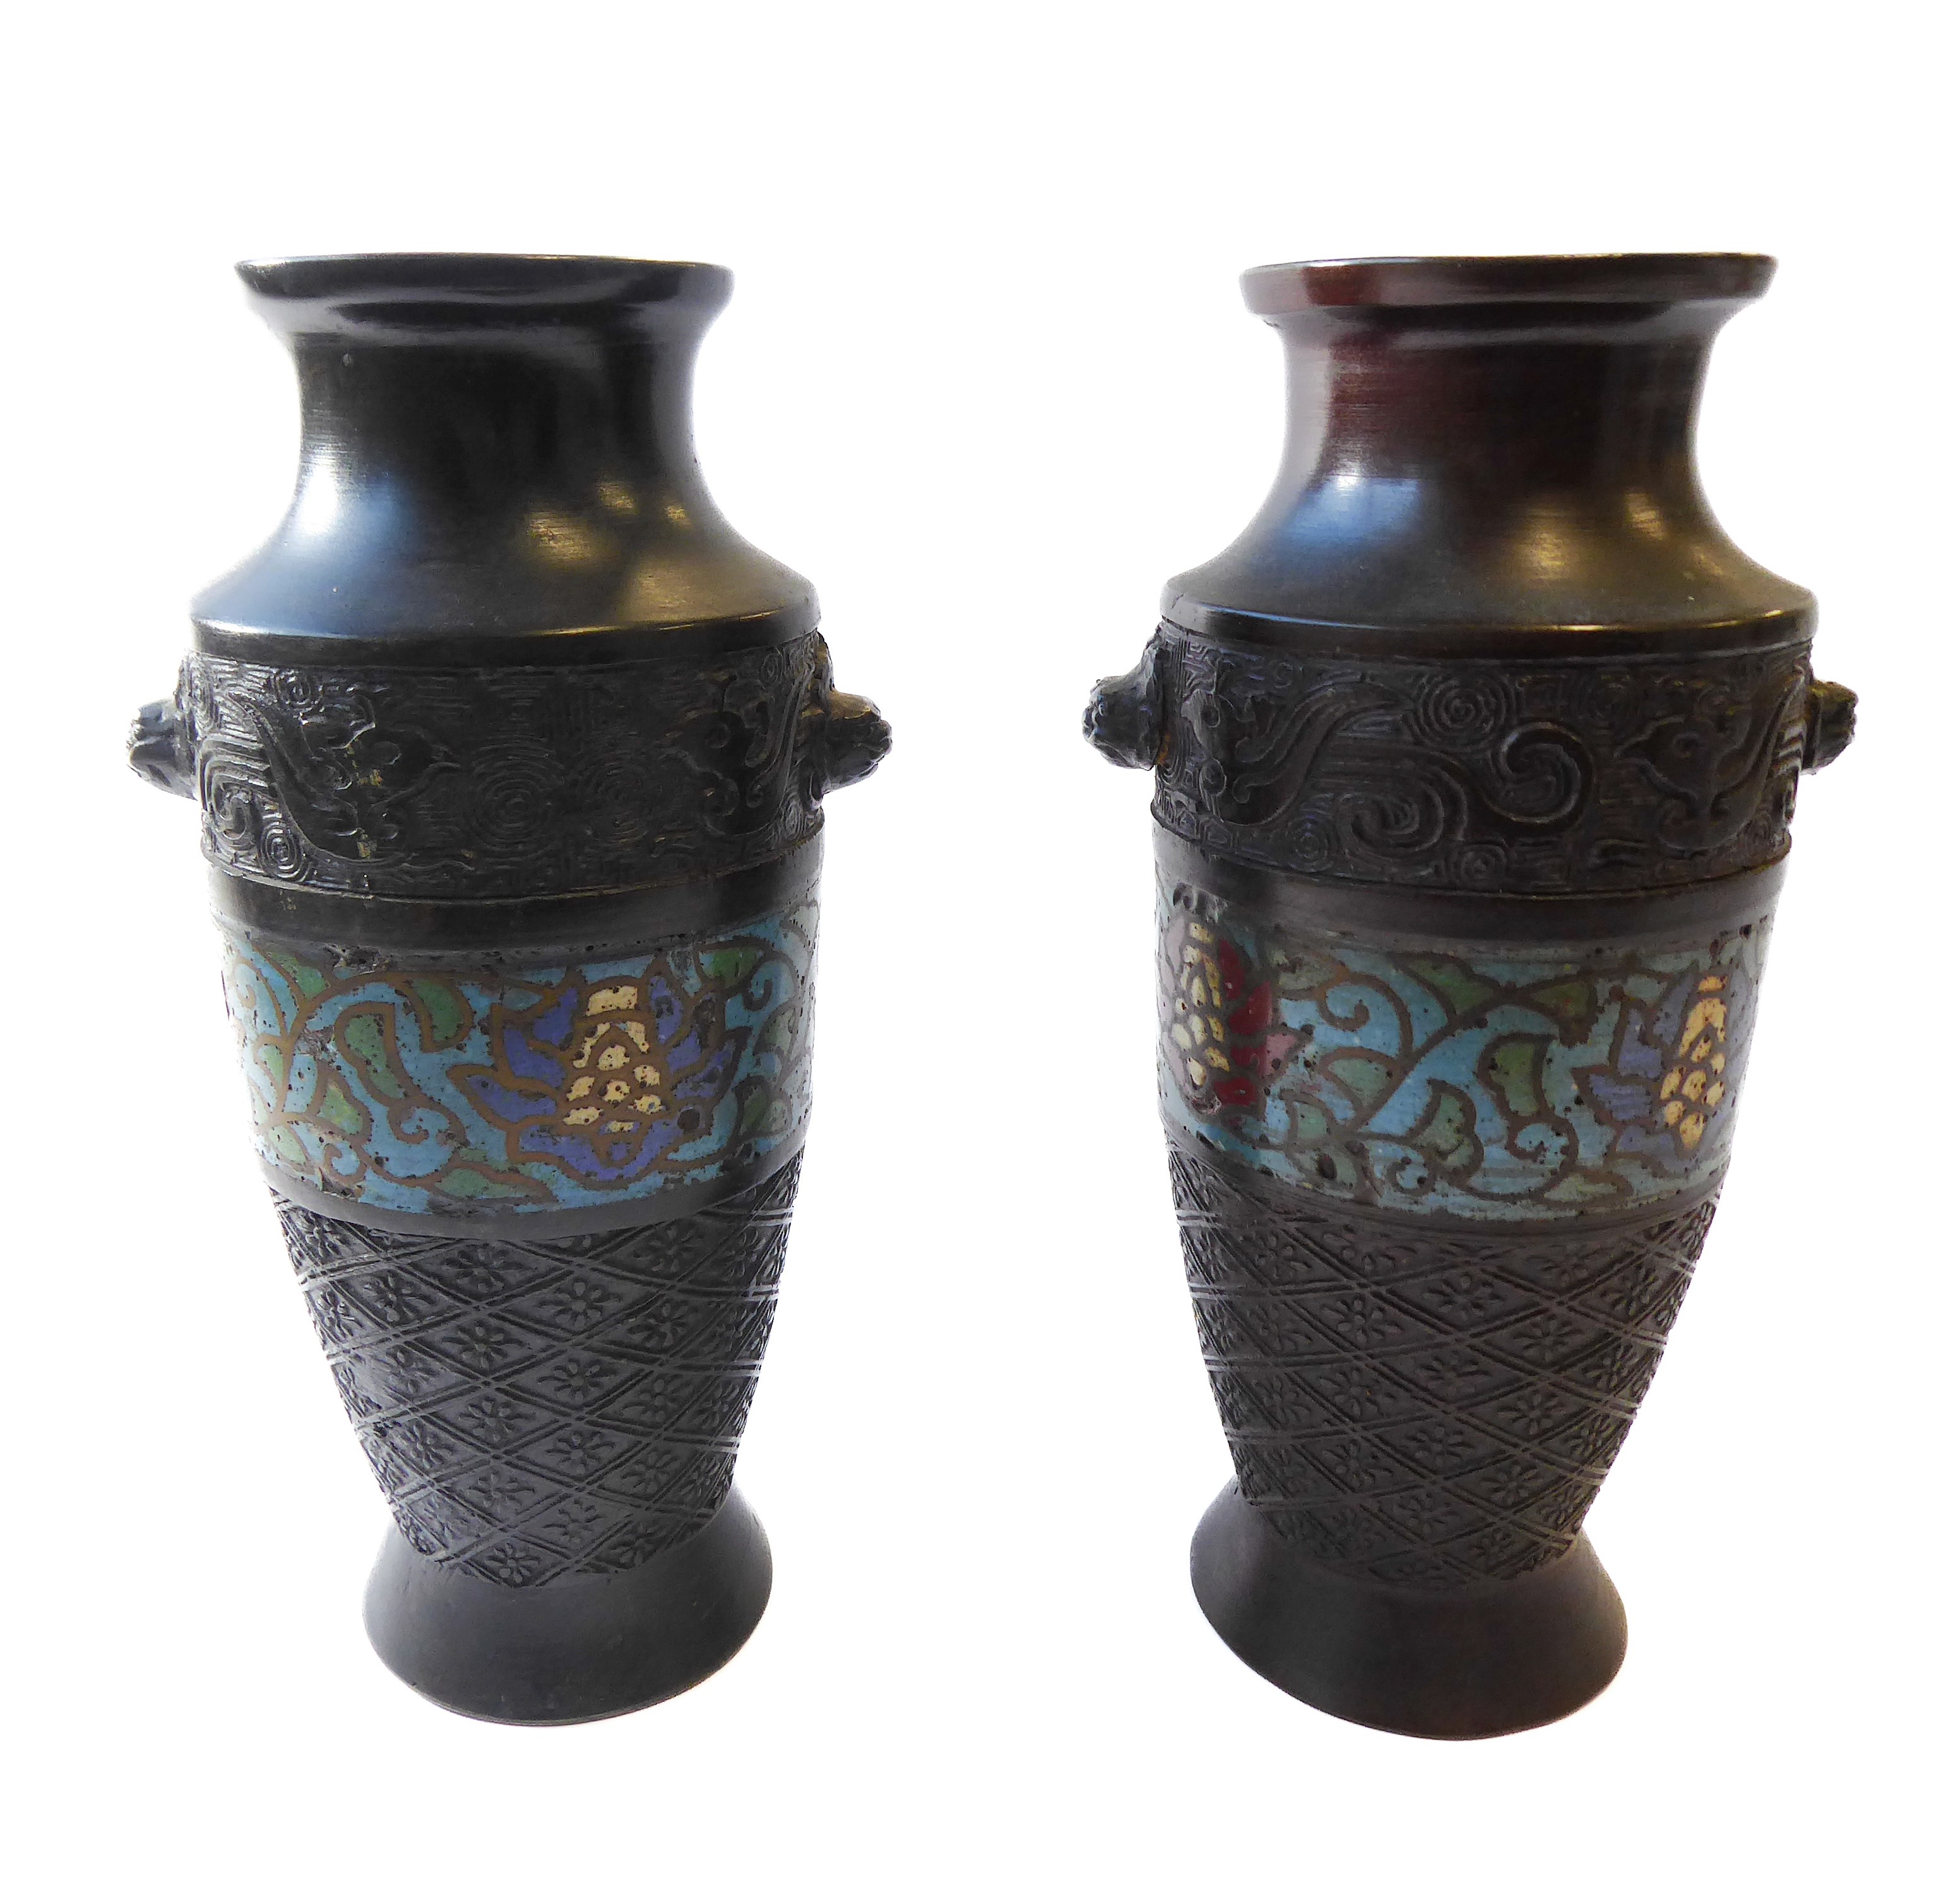 A pair of early 20th century Japanese metal vases decorated with a central cloisonné scrolling